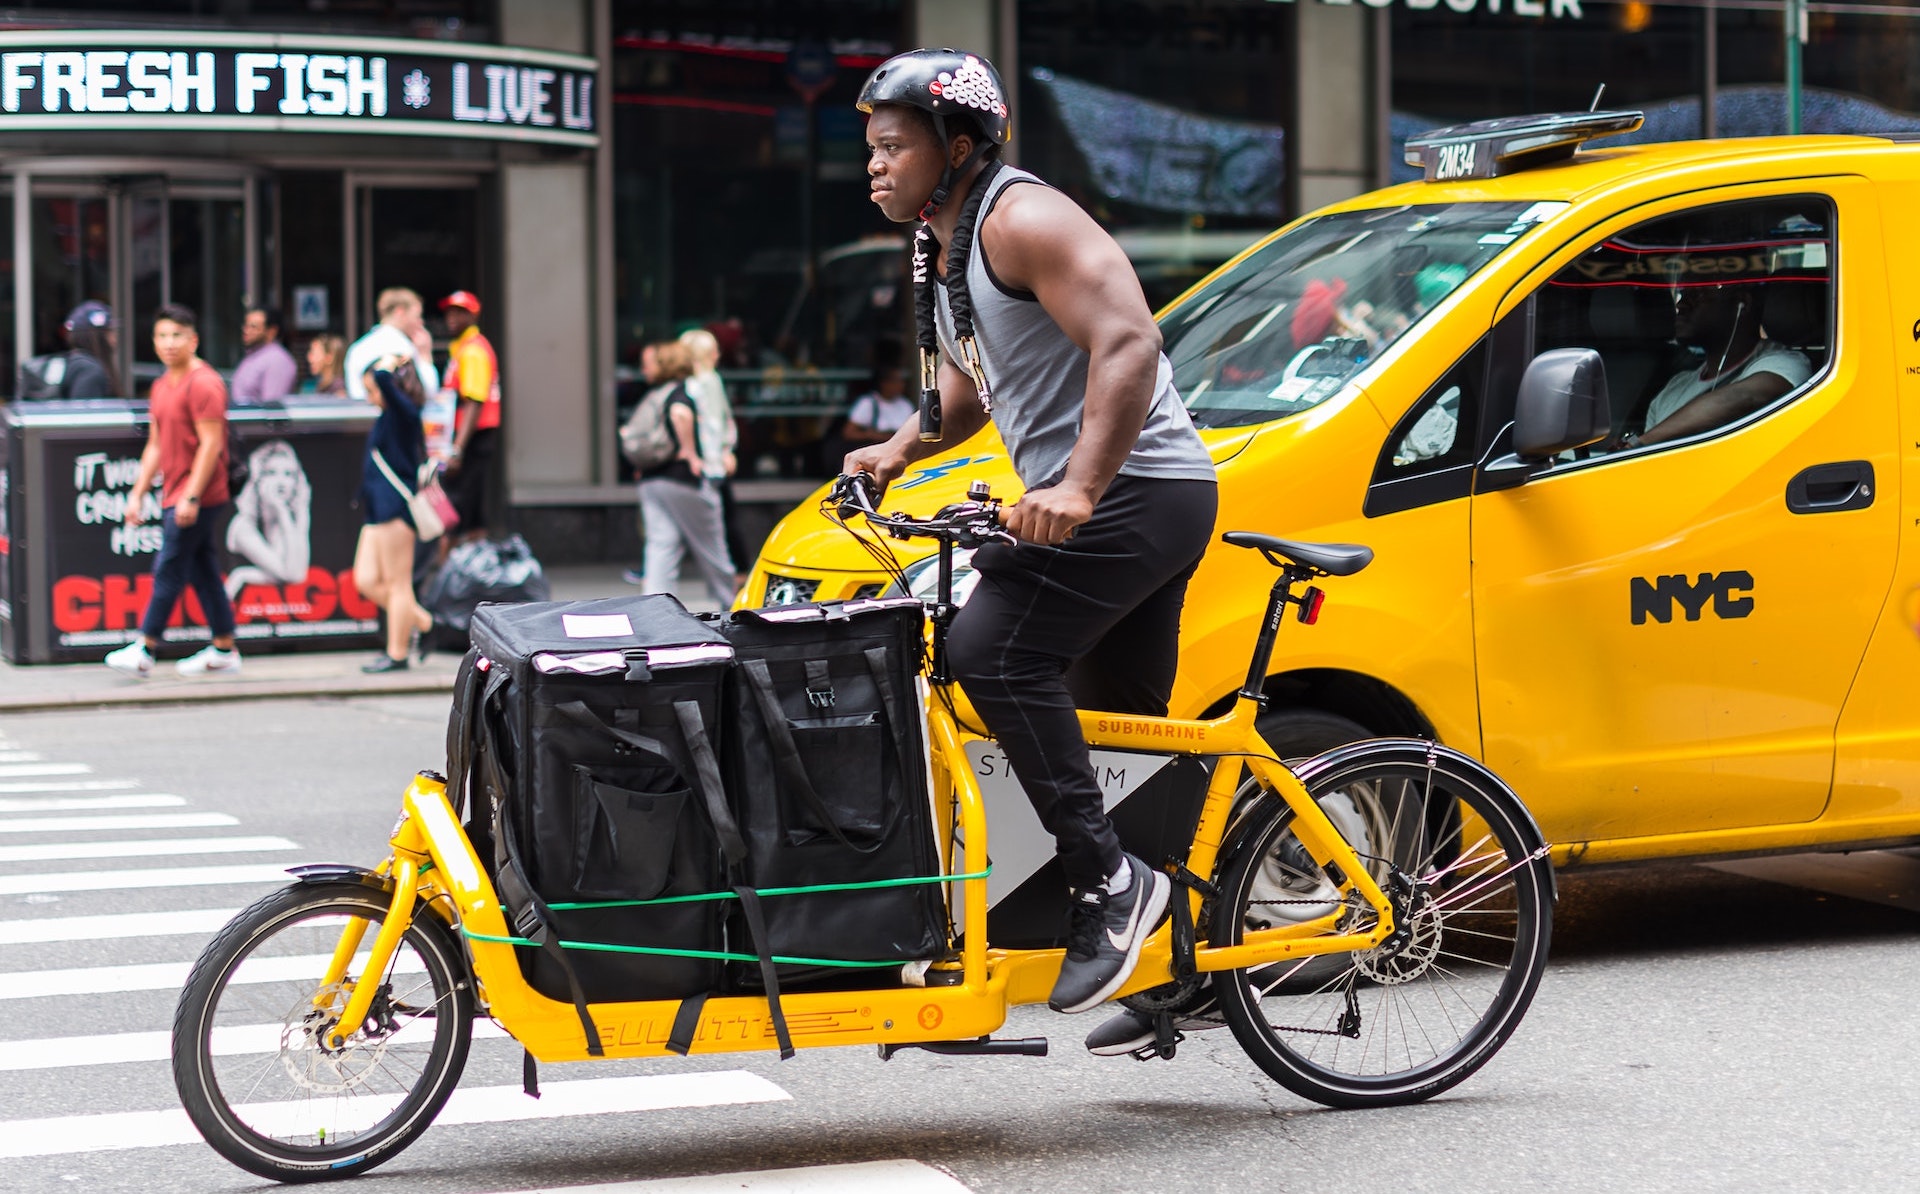 Larger Cargo Bikes in NYC Transport More Goods